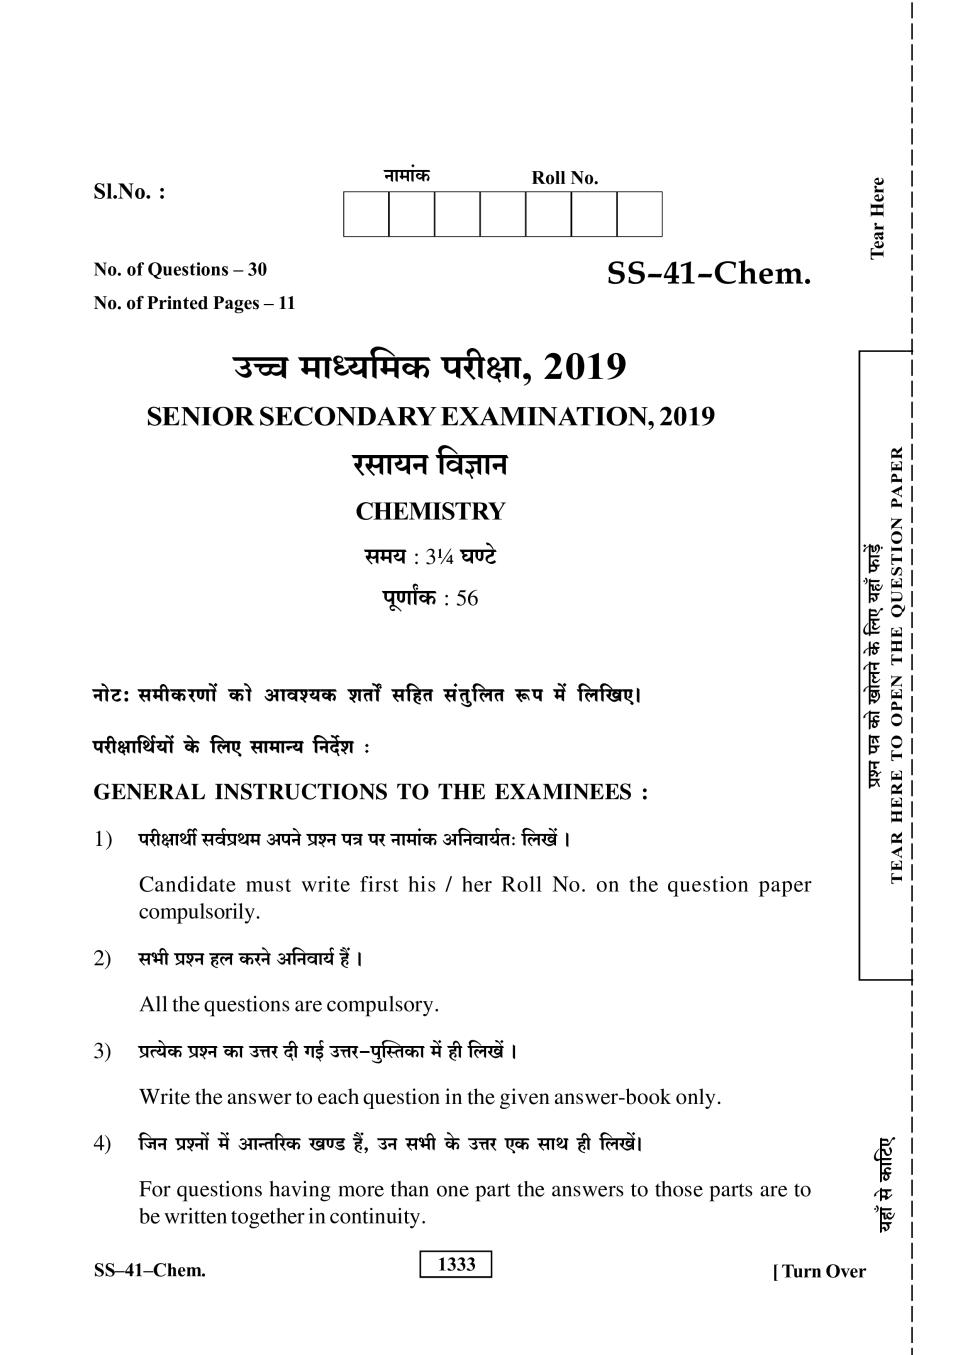 Rajasthan Board 12th Class Chemistry Question Paper 2019 - Page 1